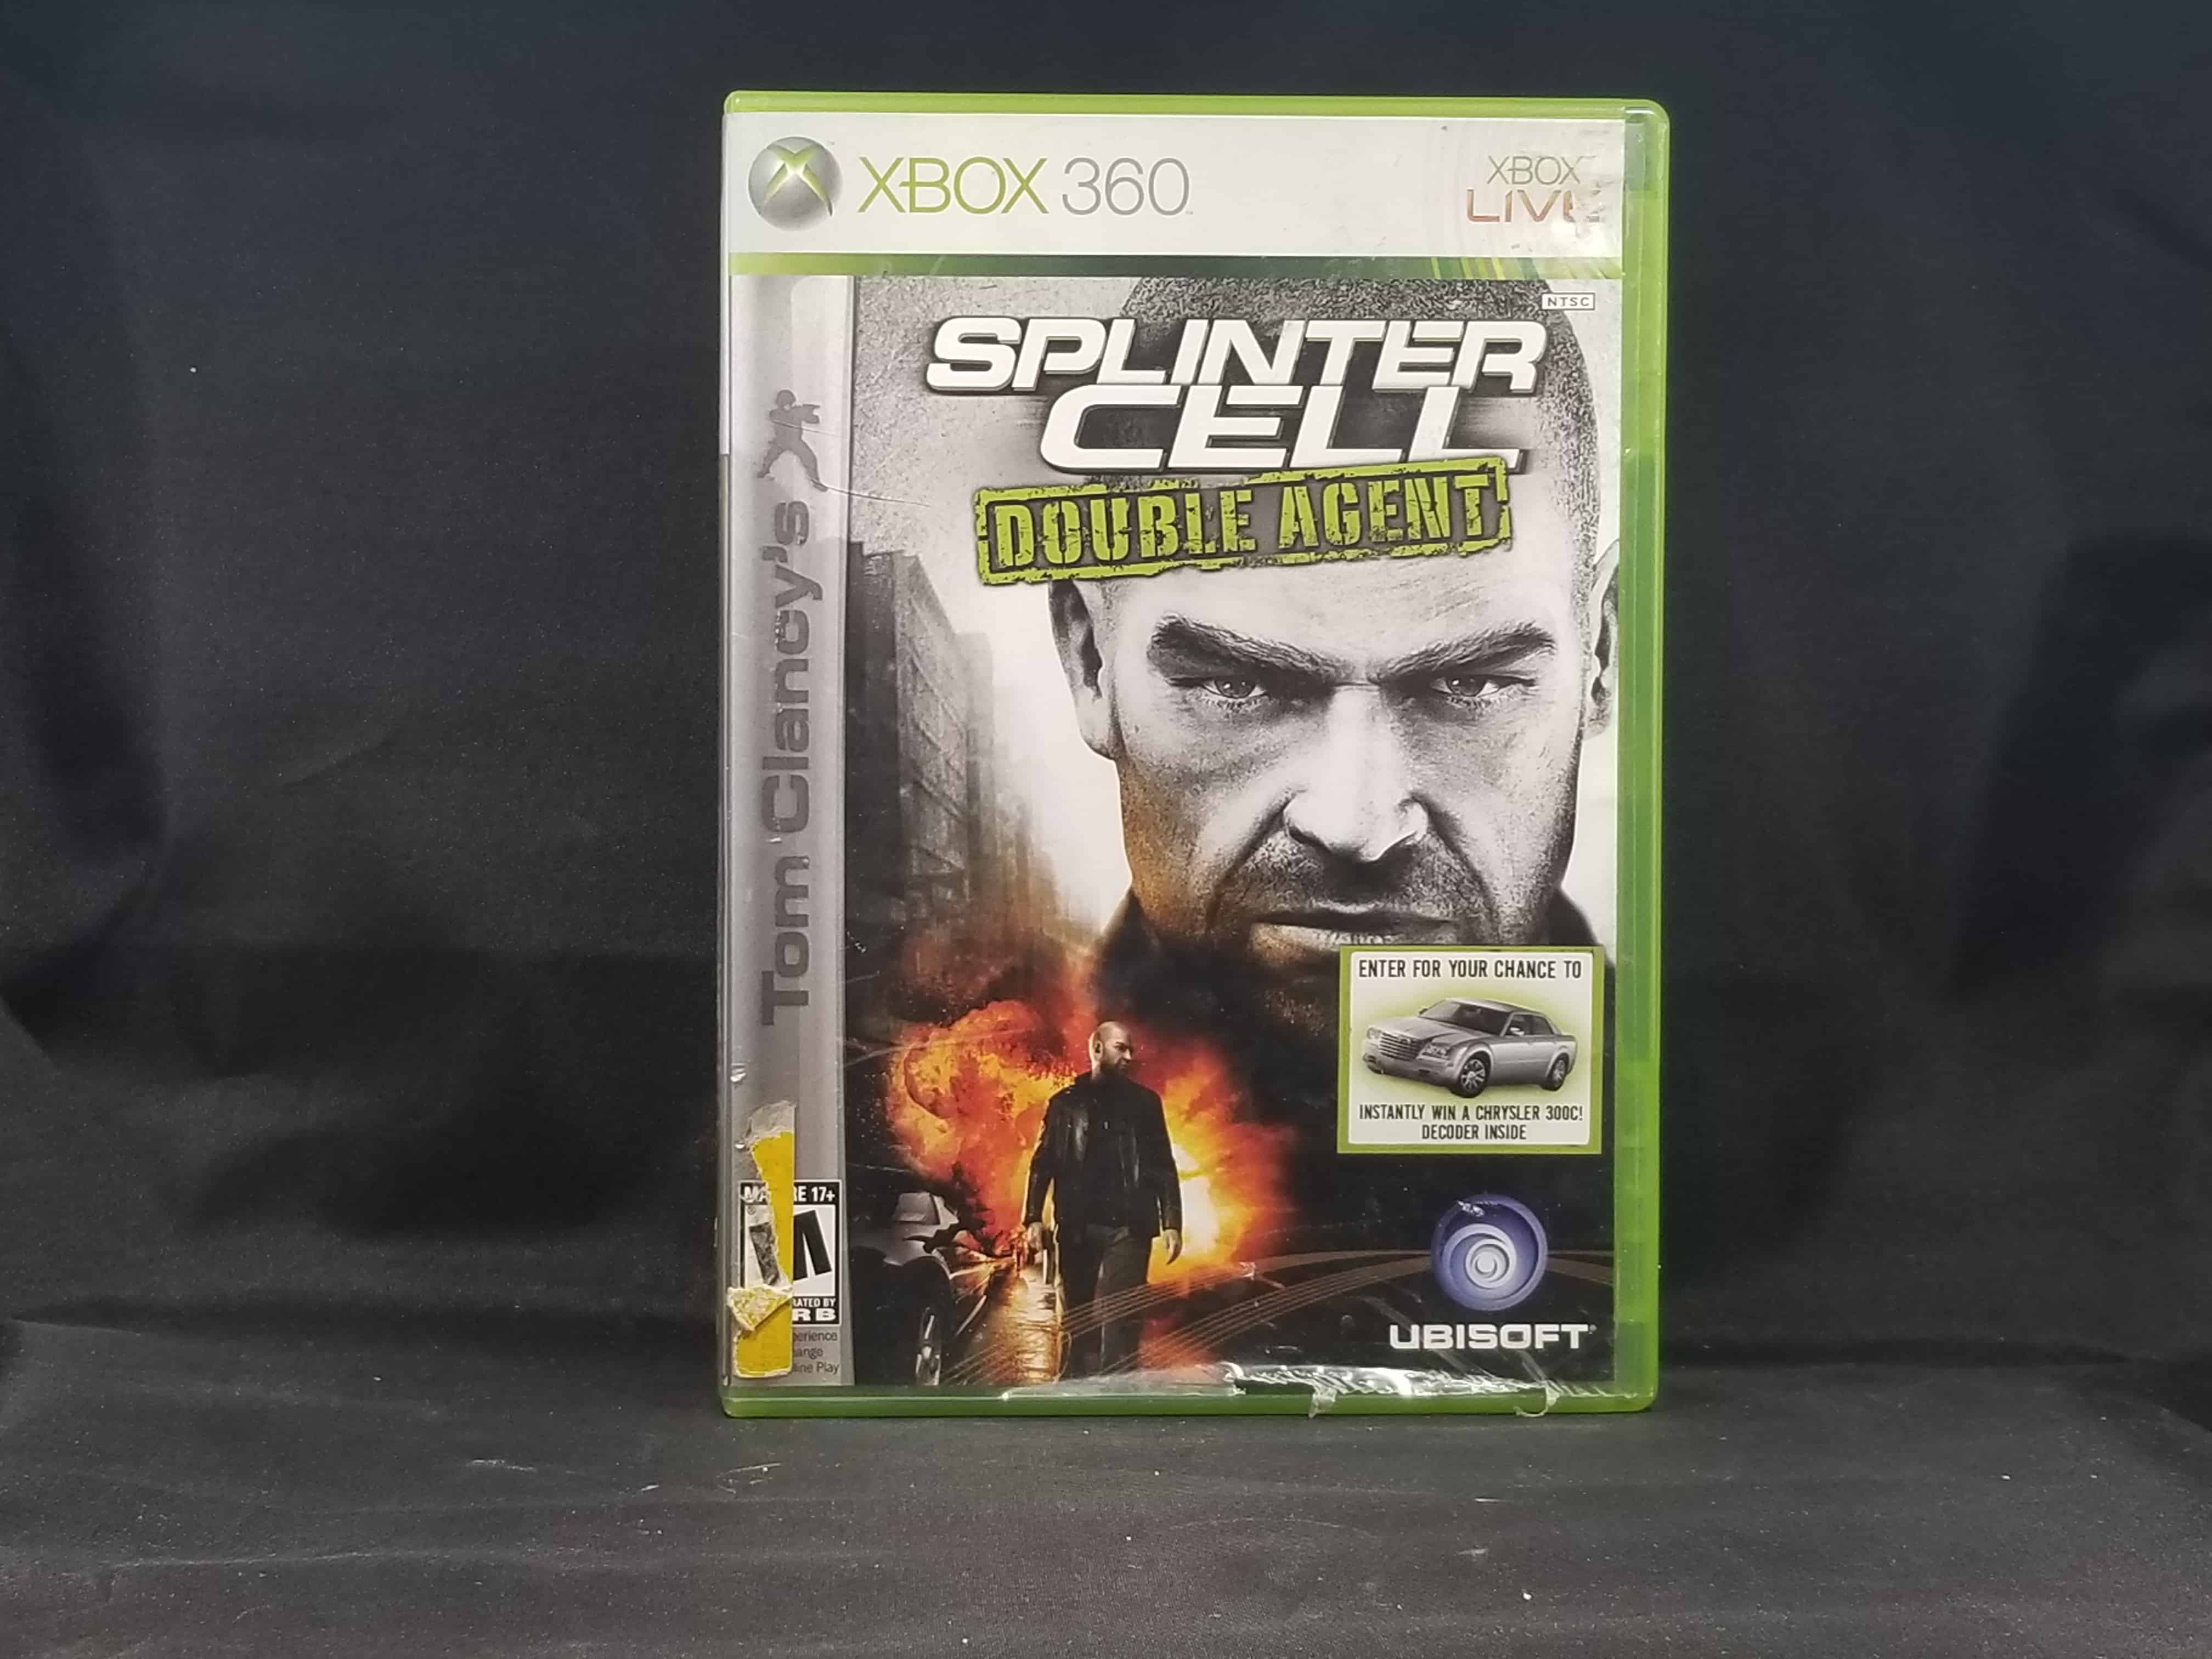 Tom Clancy's Splinter Cell: Double Agent - Xbox 360 [Pre-Owned